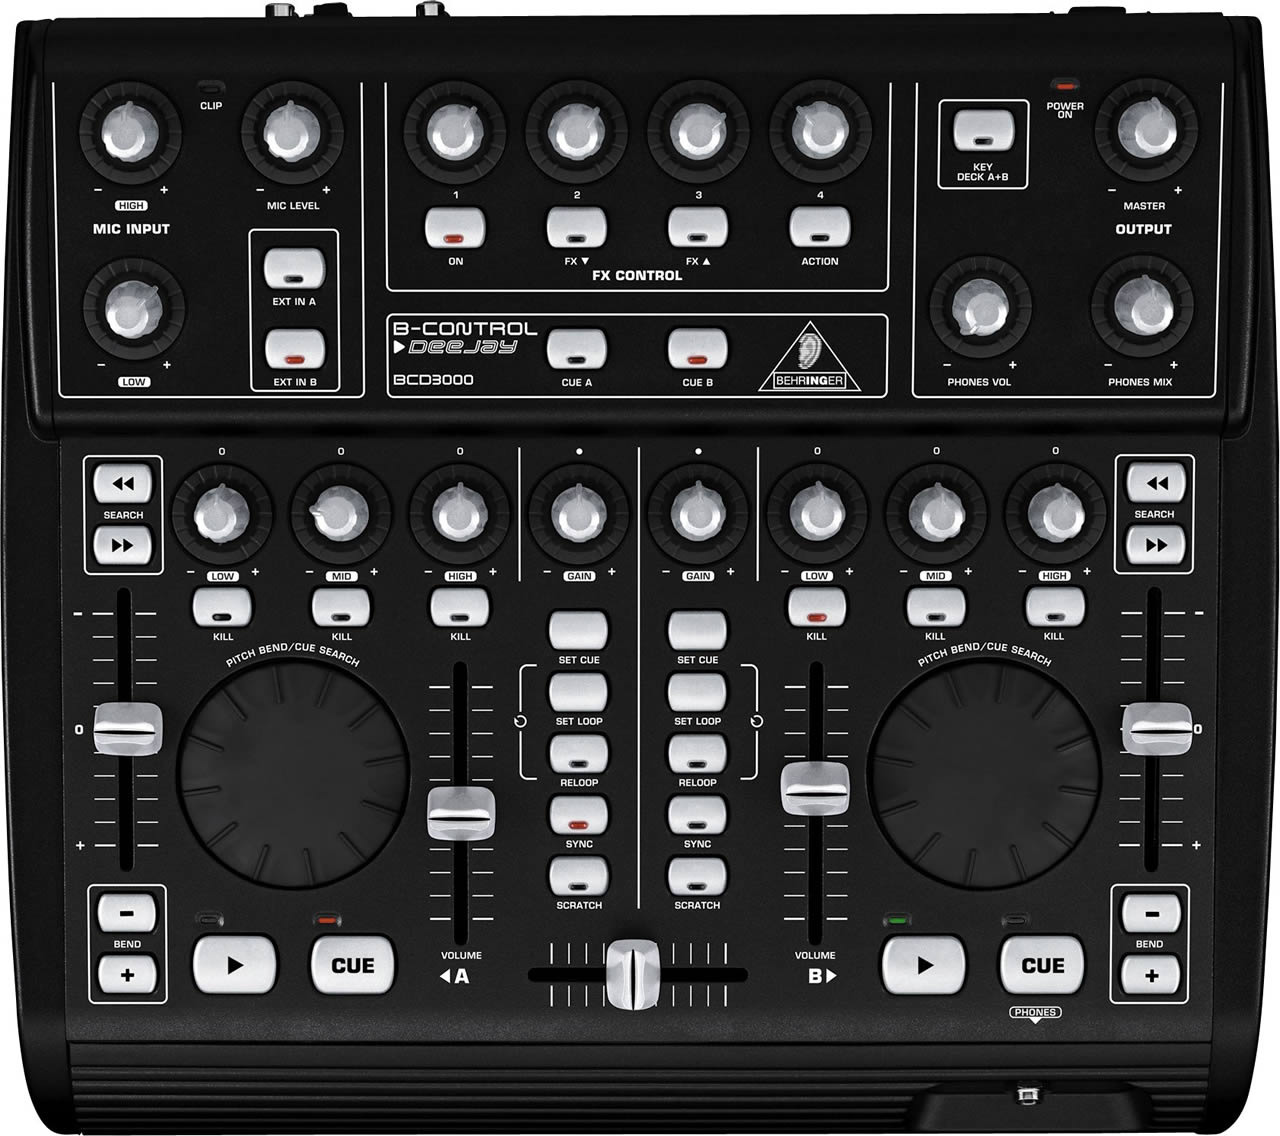 Behringer bcd3000 asio driver for mac